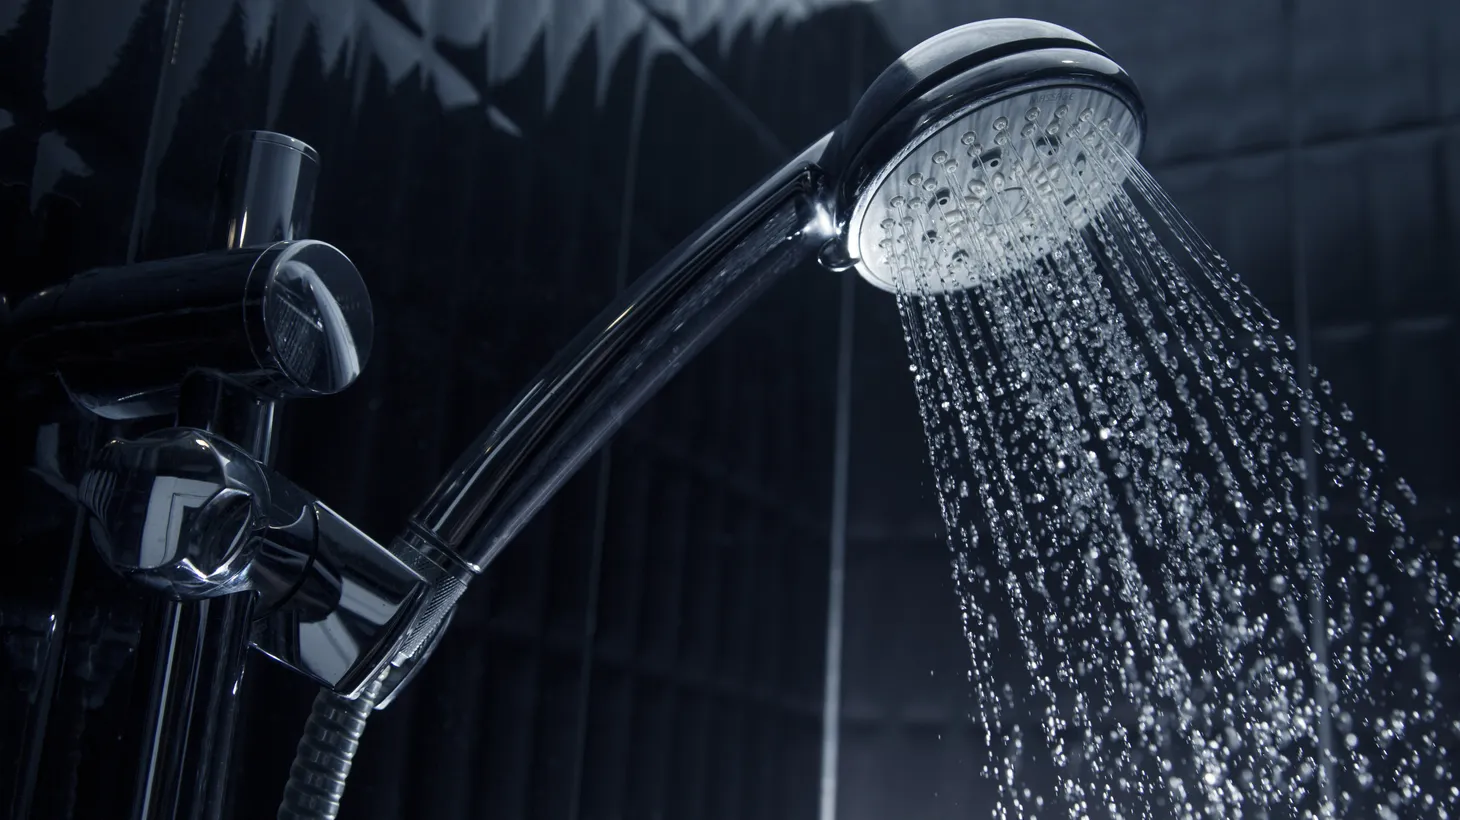 Five-minute showers are optimal, and when waiting for water to heat up, put a bucket or watering can in the shower to conserve and recycle water, says Rita Kampalath, sustainability program director for LA County’s Chief Sustainability Office.